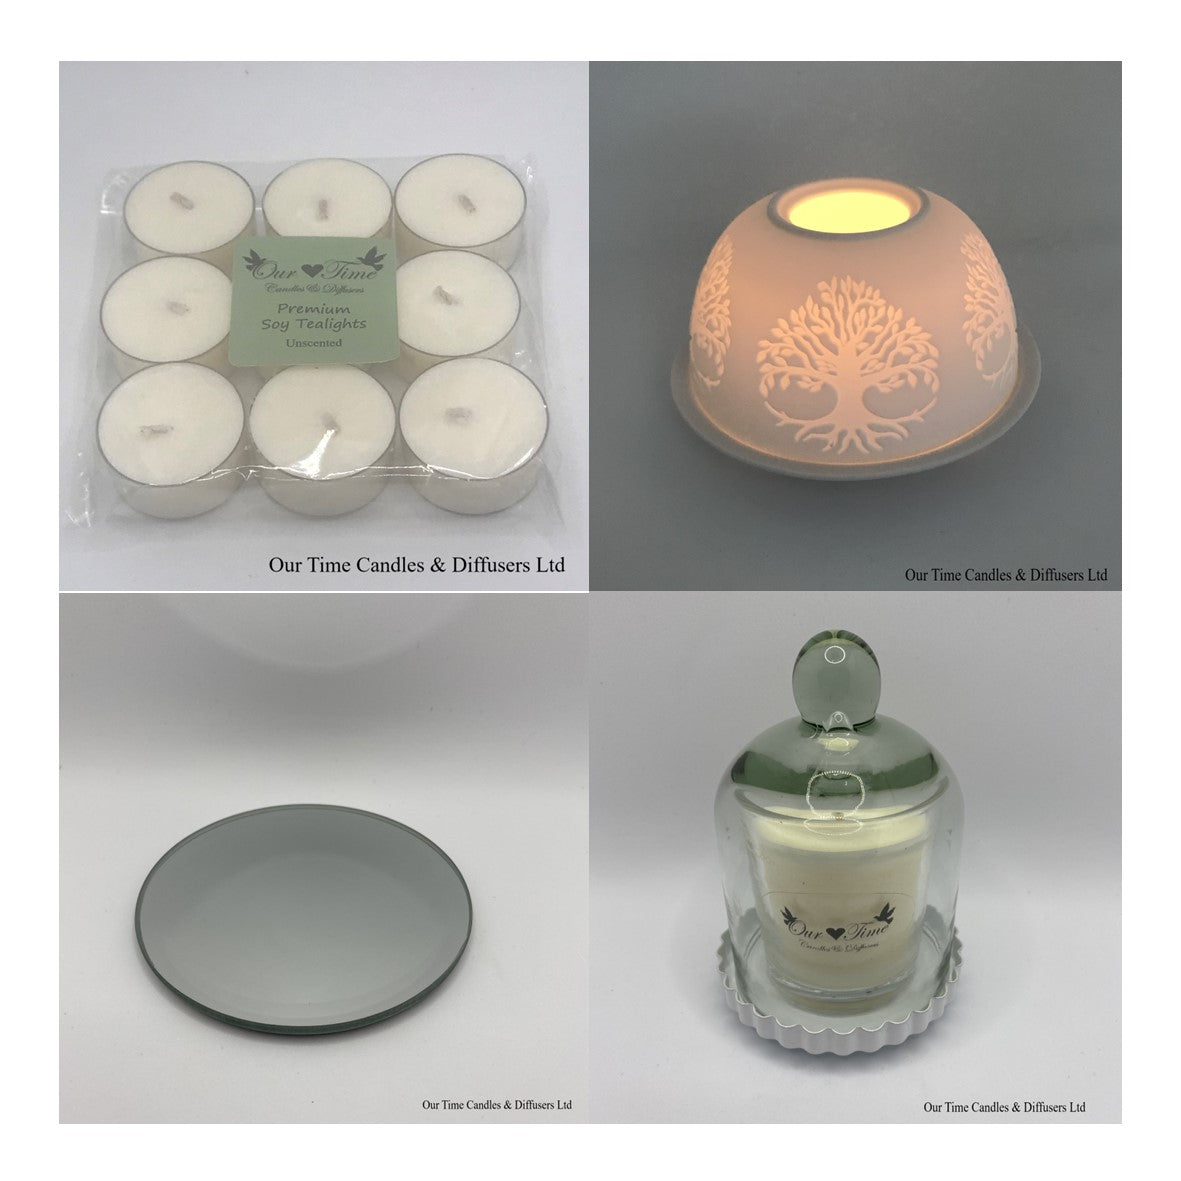 Tealights from Our Time Candles and Diffusers